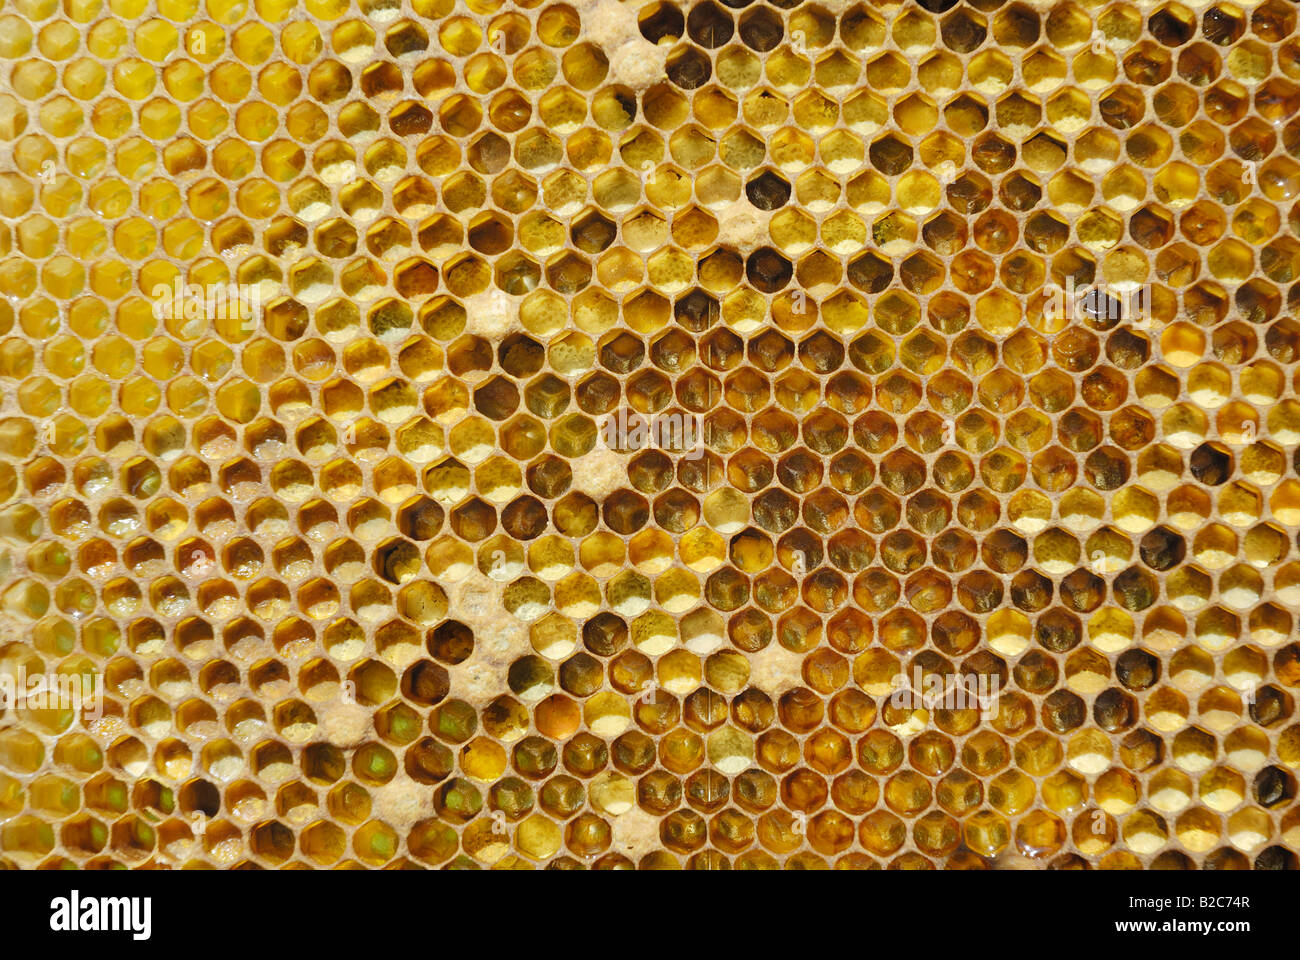 Wax honeycomb with pollen in the cells Stock Photo